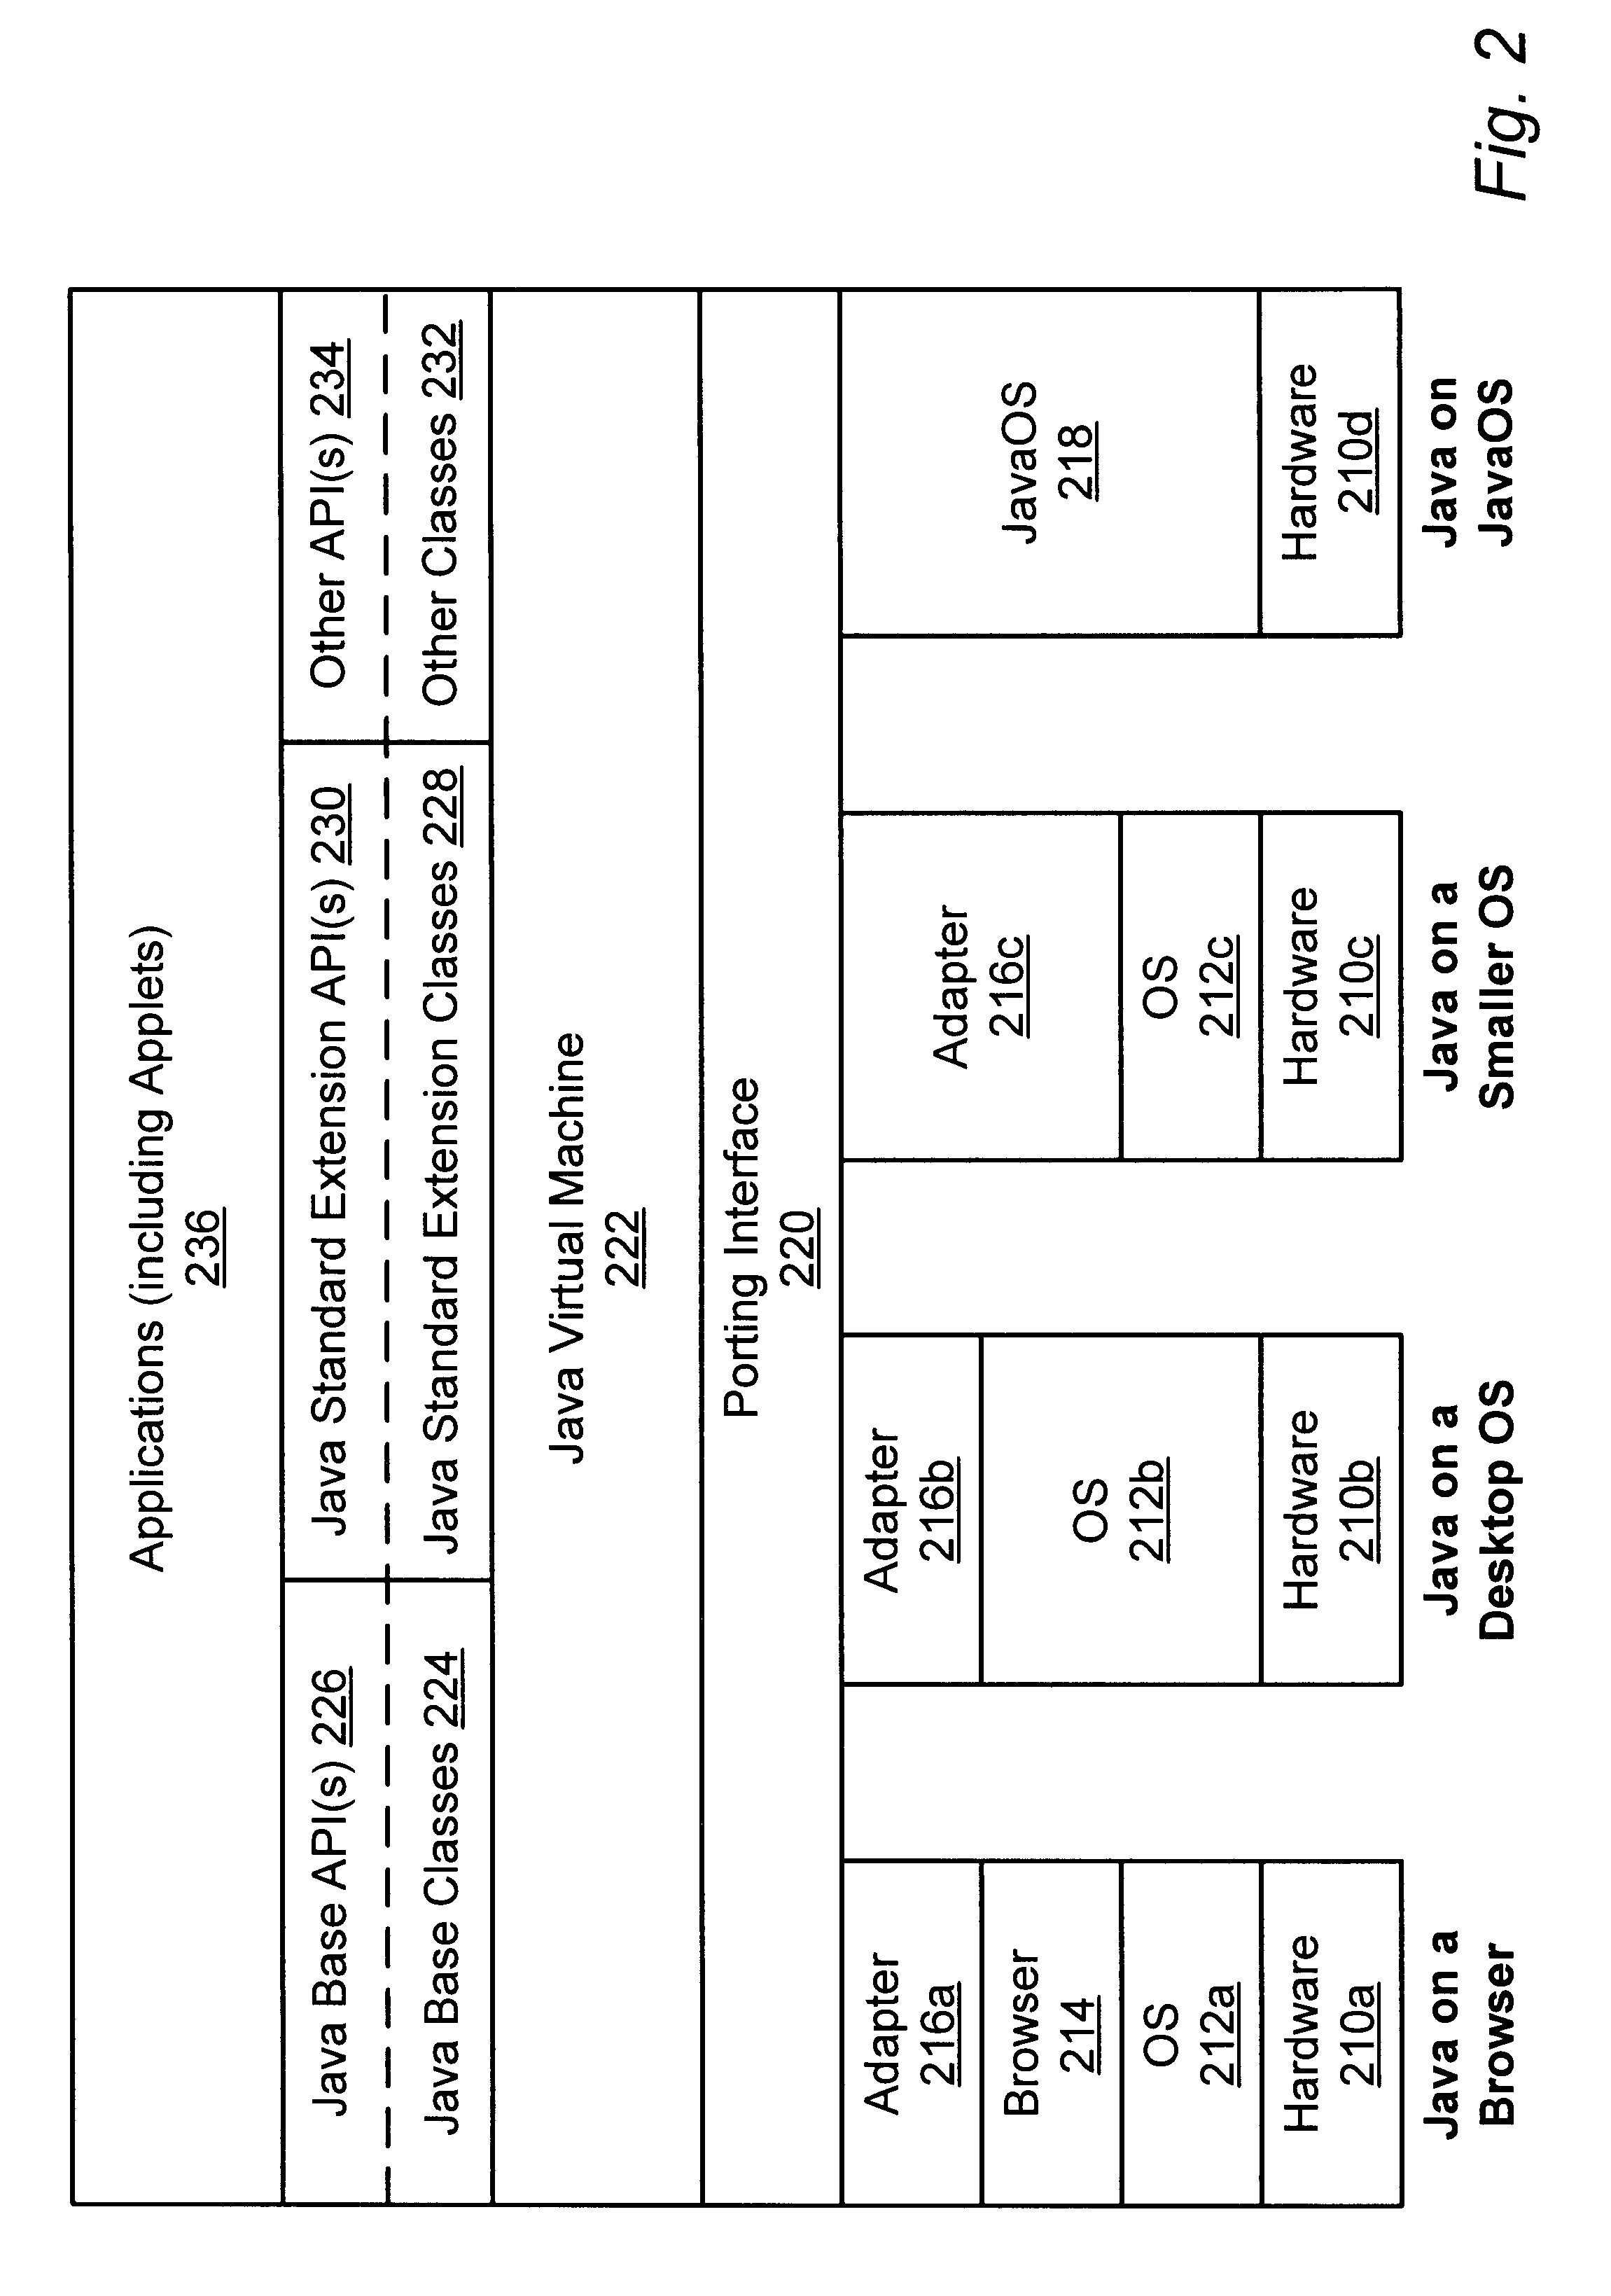 System and method for minimizing inter-application interference among static synchronized methods